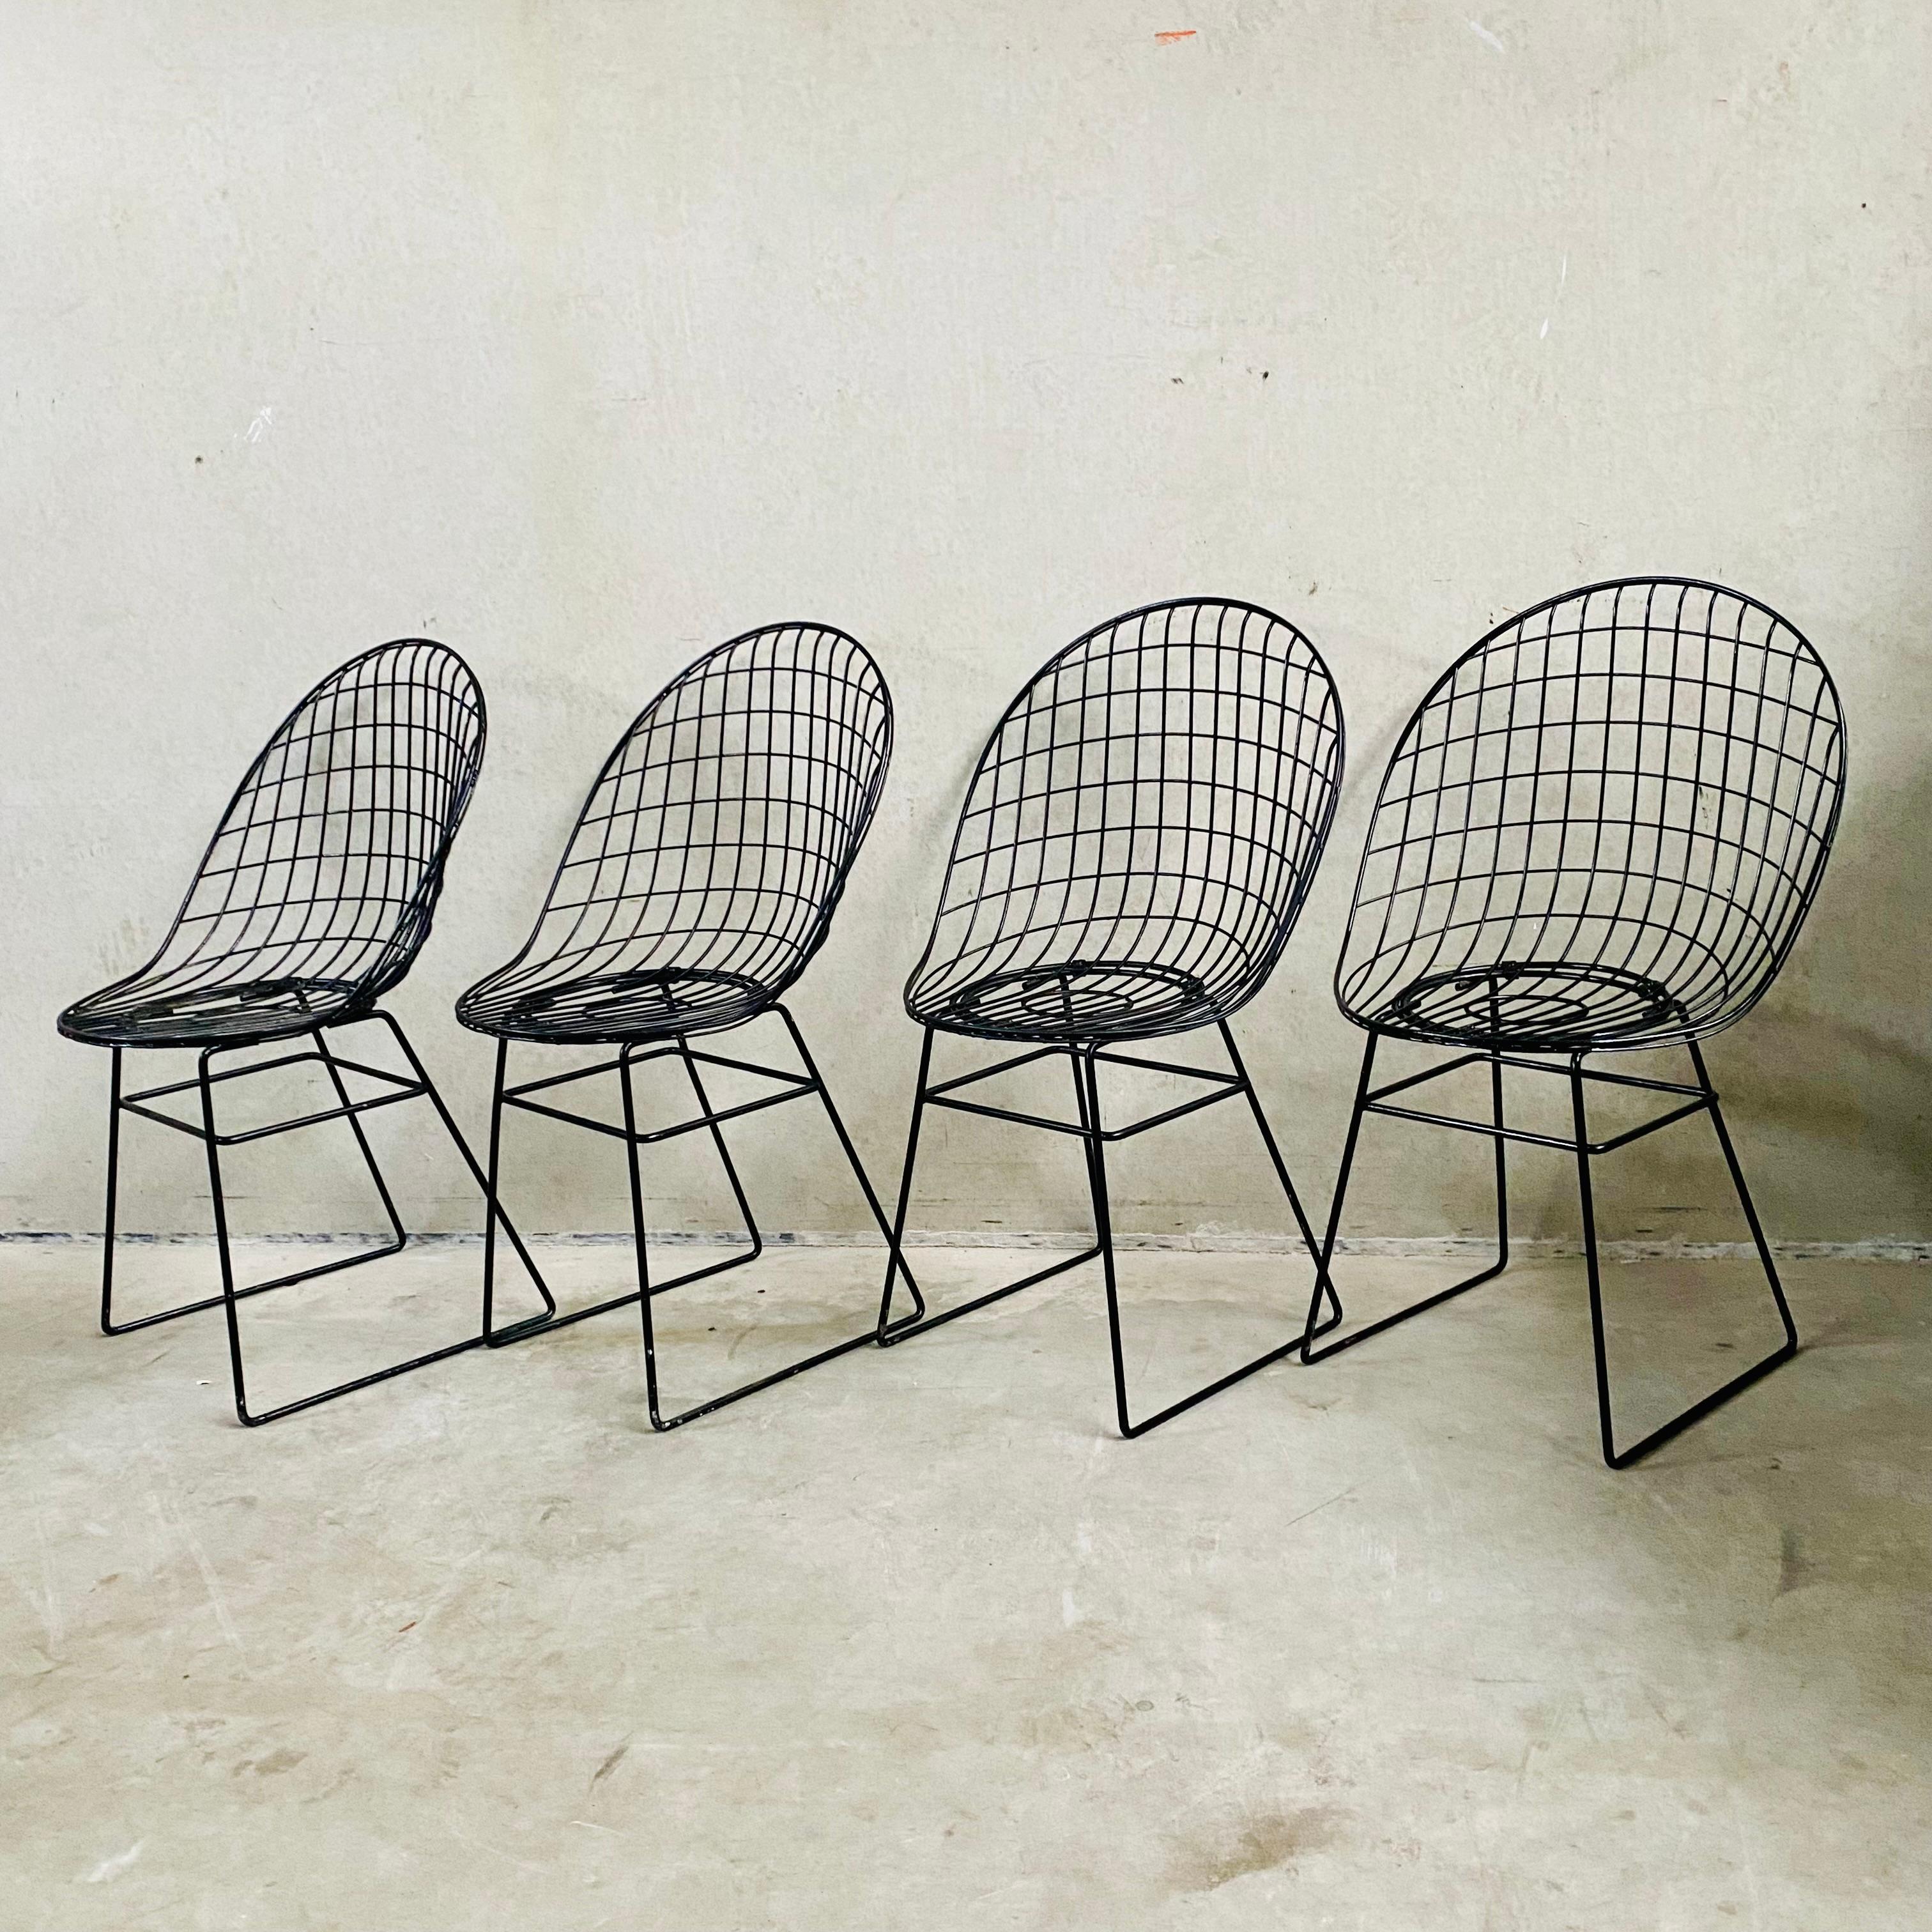 4 Early Edition Wire Chairs by Cees Braakman & A. Dekker for UMS Pastoe, 1950 For Sale 7